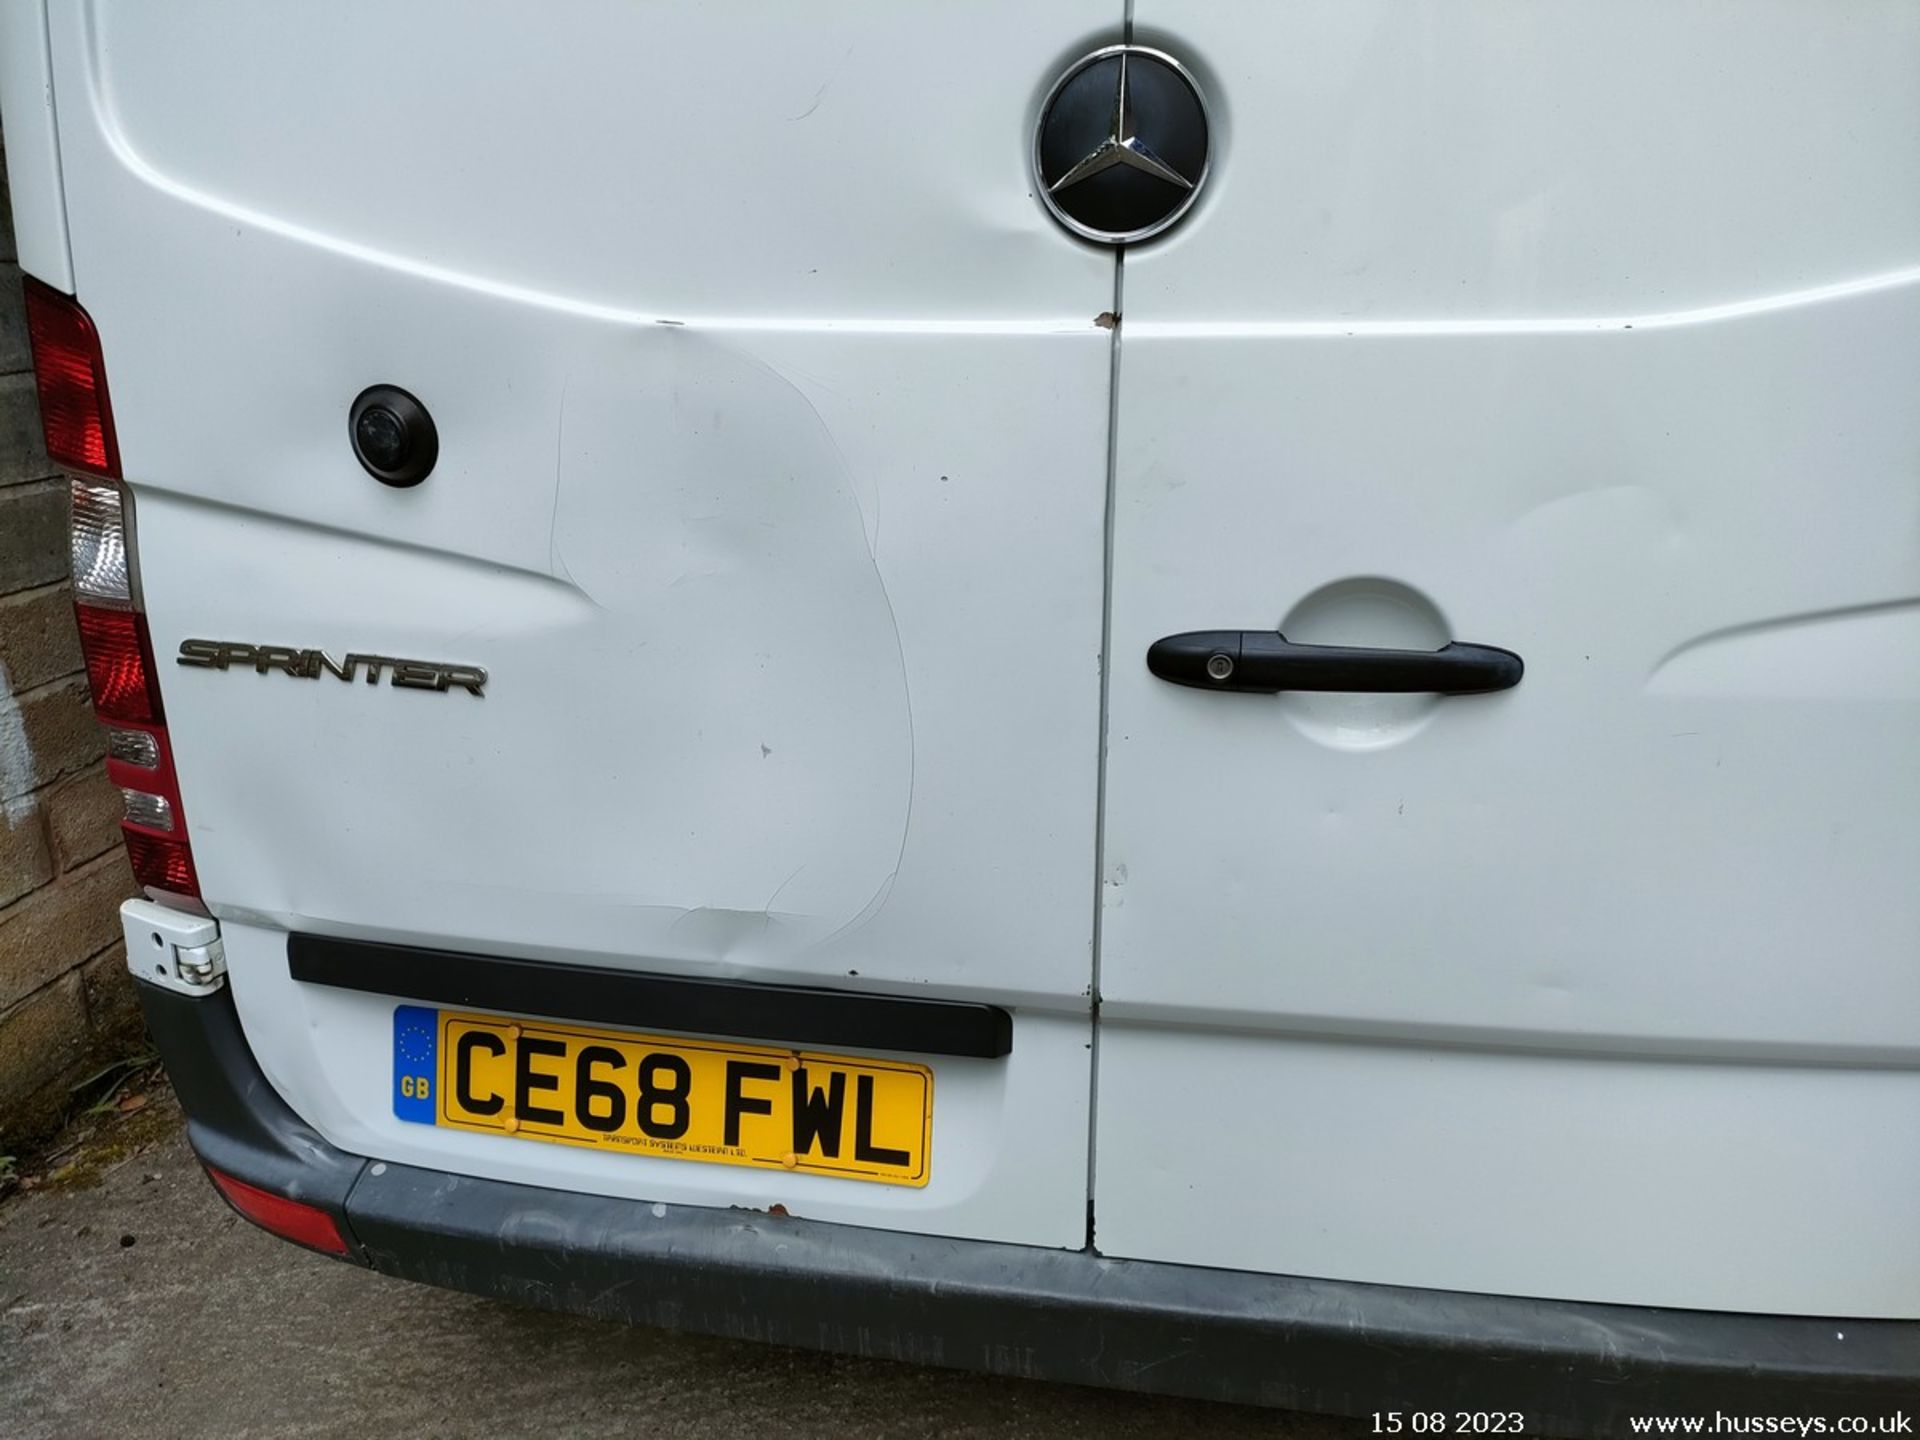 18/68 MERCEDES-BENZ SPRINTER 314CDI - 2143cc 5dr Refrigerated (White) - Image 27 of 40